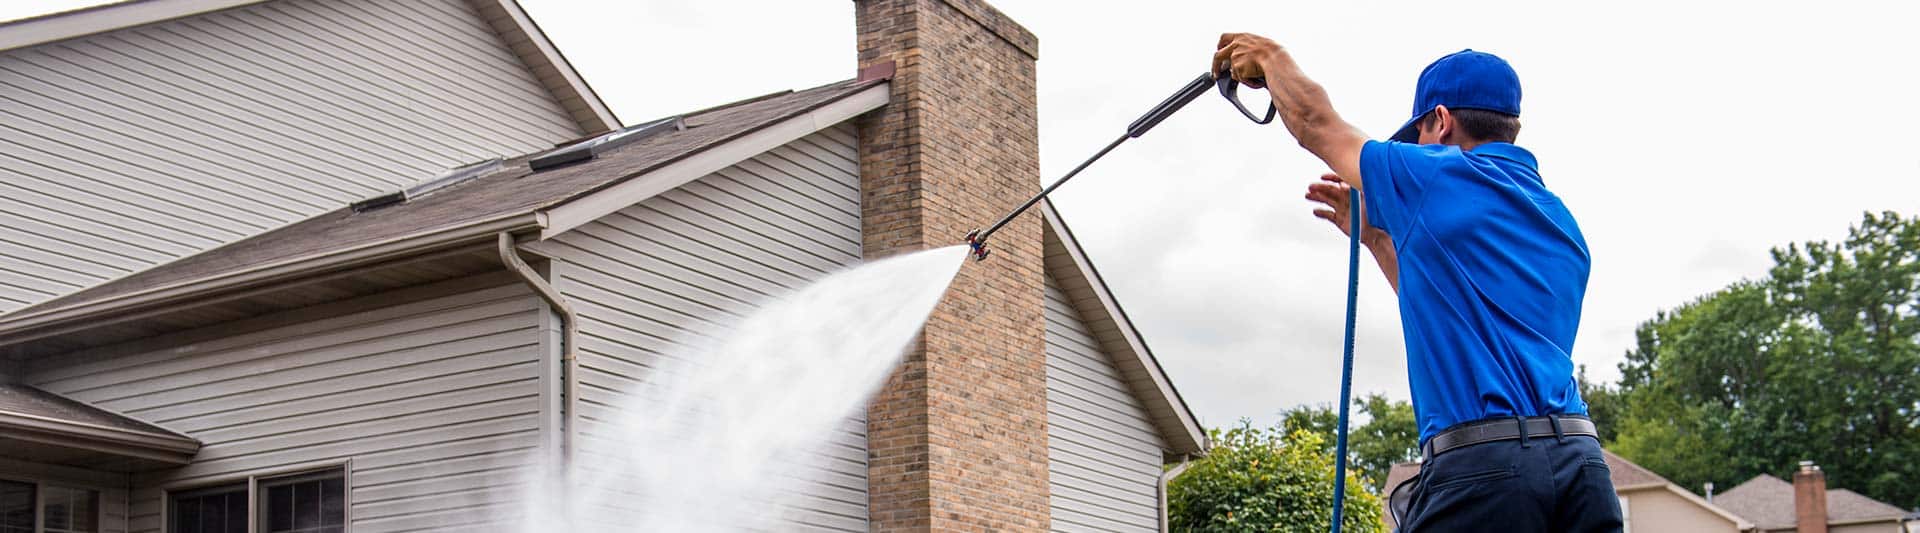 Pressure Washing Services in Liberty Hill TX